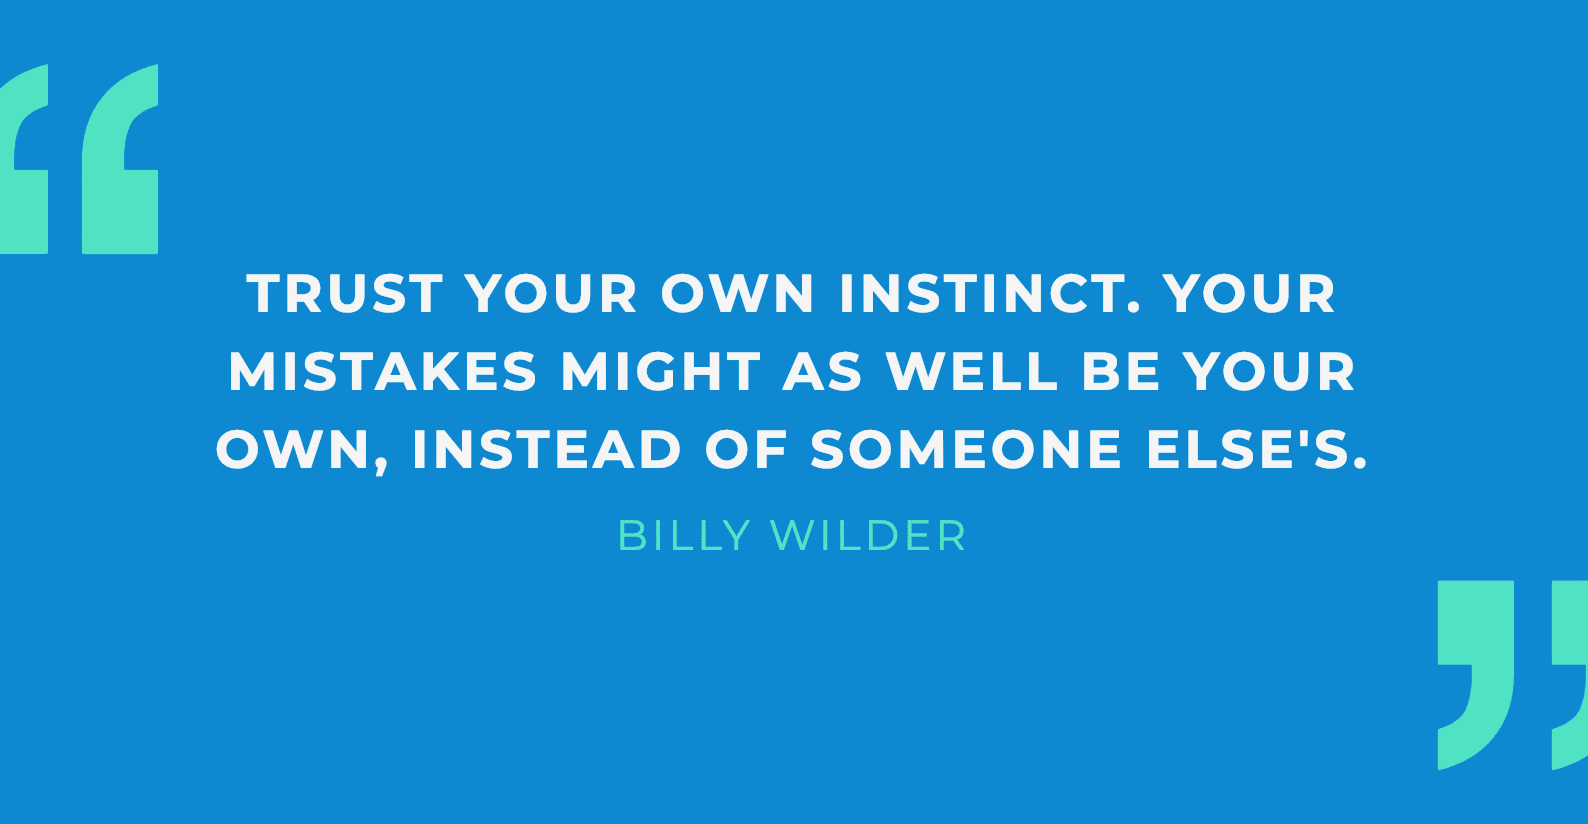 Trust your own instinct. Your mistakes might as well be your own instead of someone else's - Billy Wilder: bitcoin trust your instincts